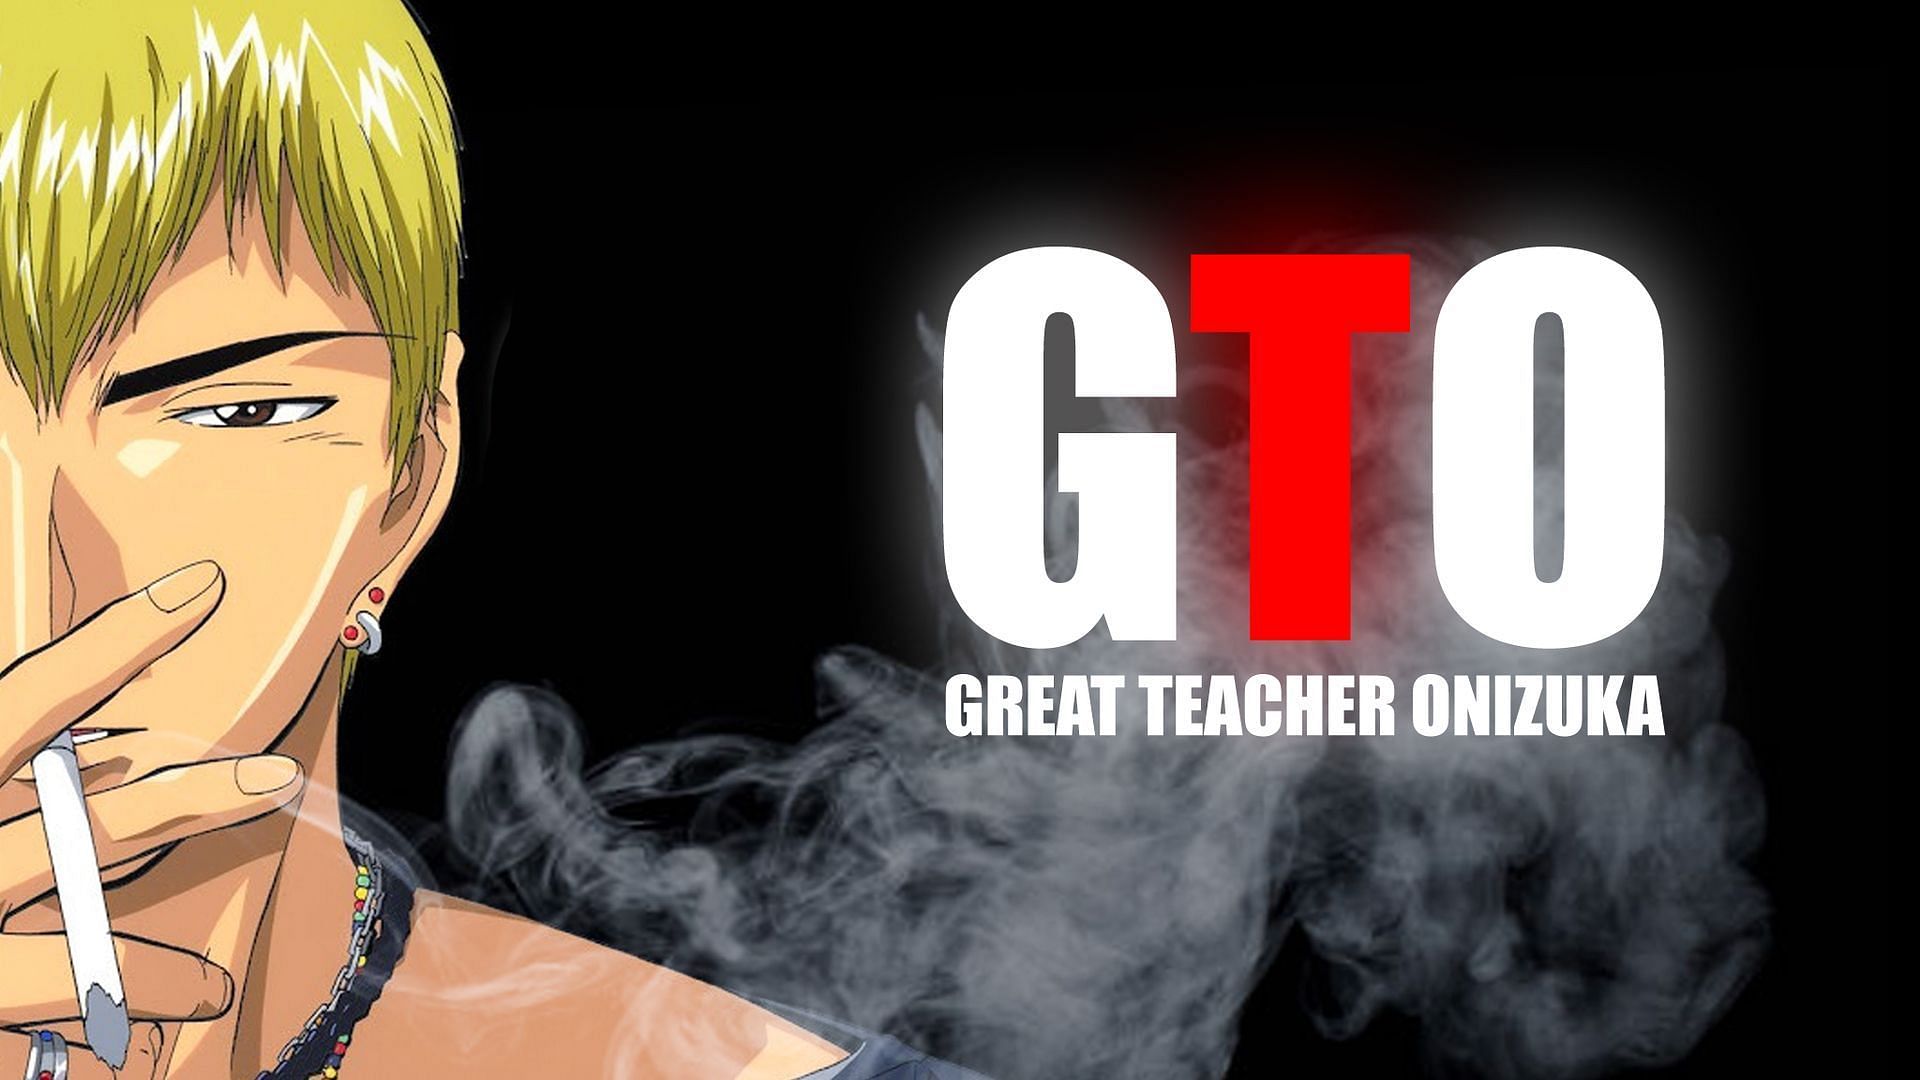 The official poster of Great Teacher Onizuka featuring the protagonist (Image via Studio Pierrot)